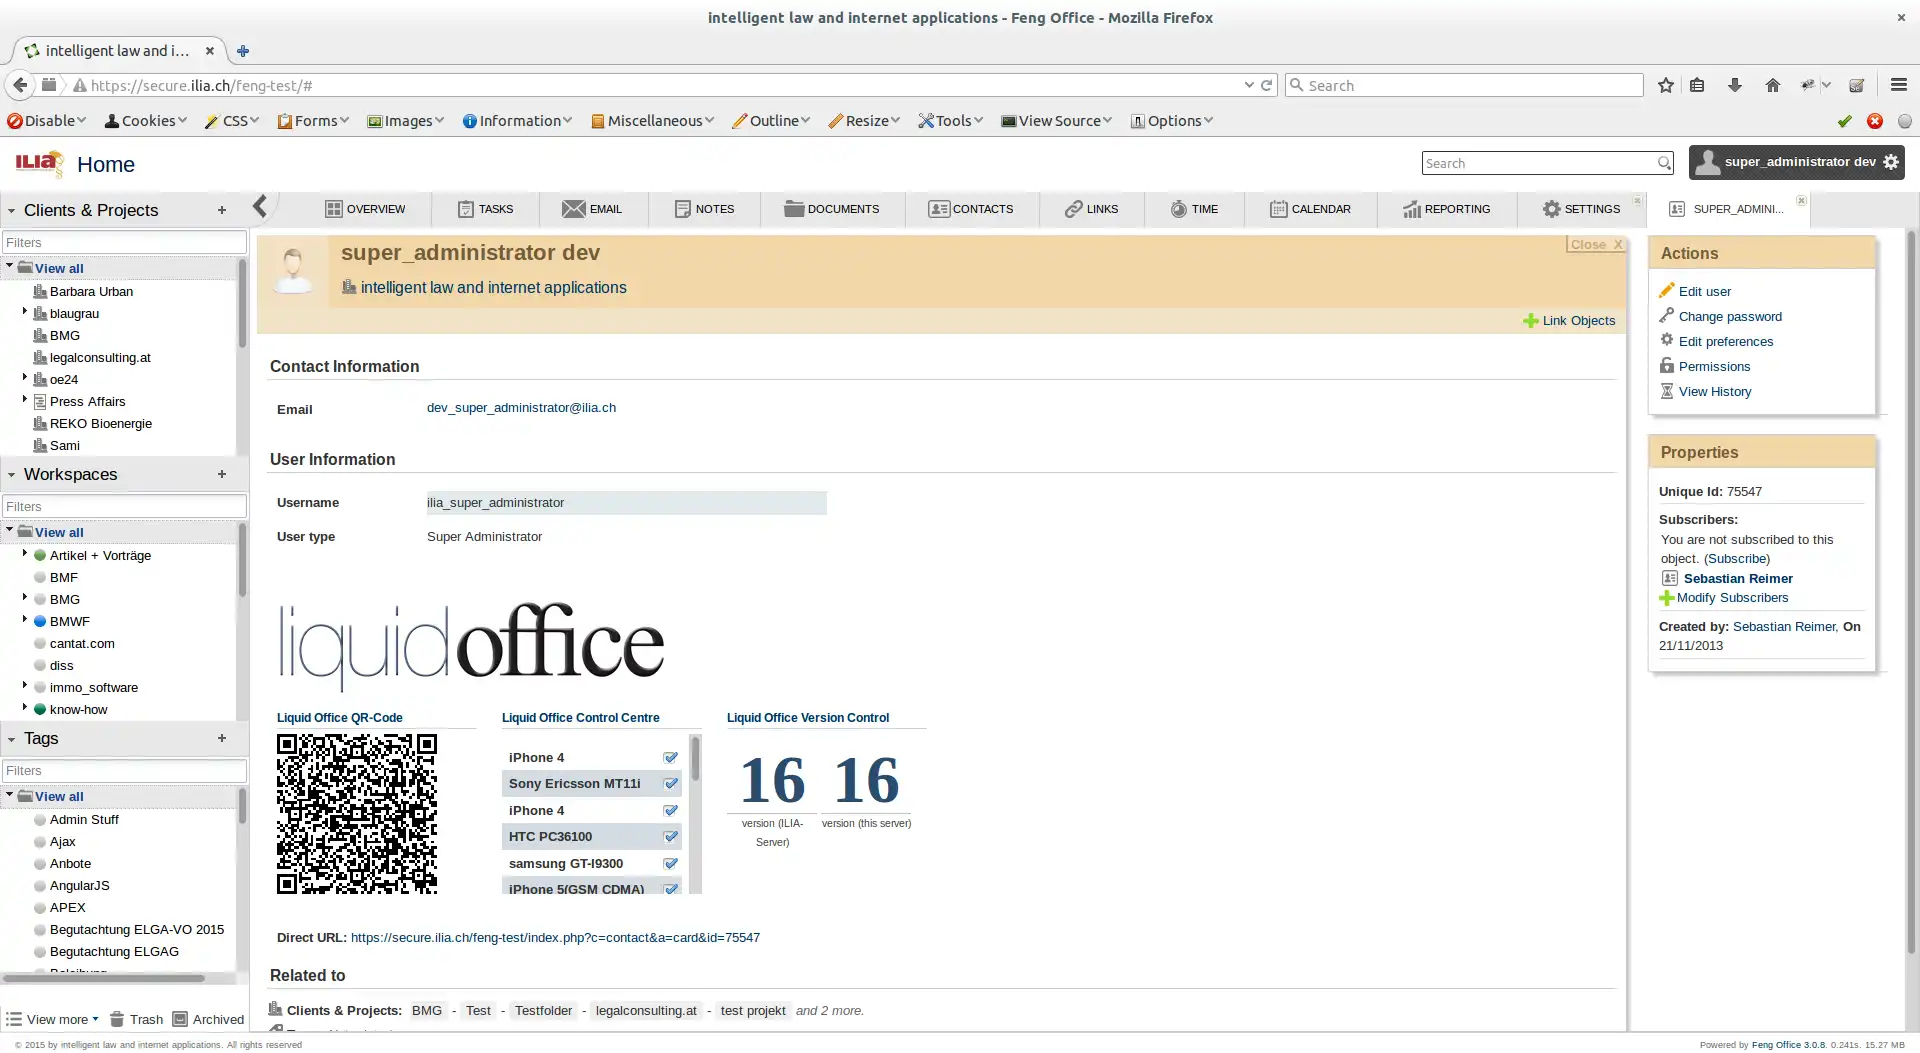 Download web tool or web app Liquid Office (native Feng Office Apps)